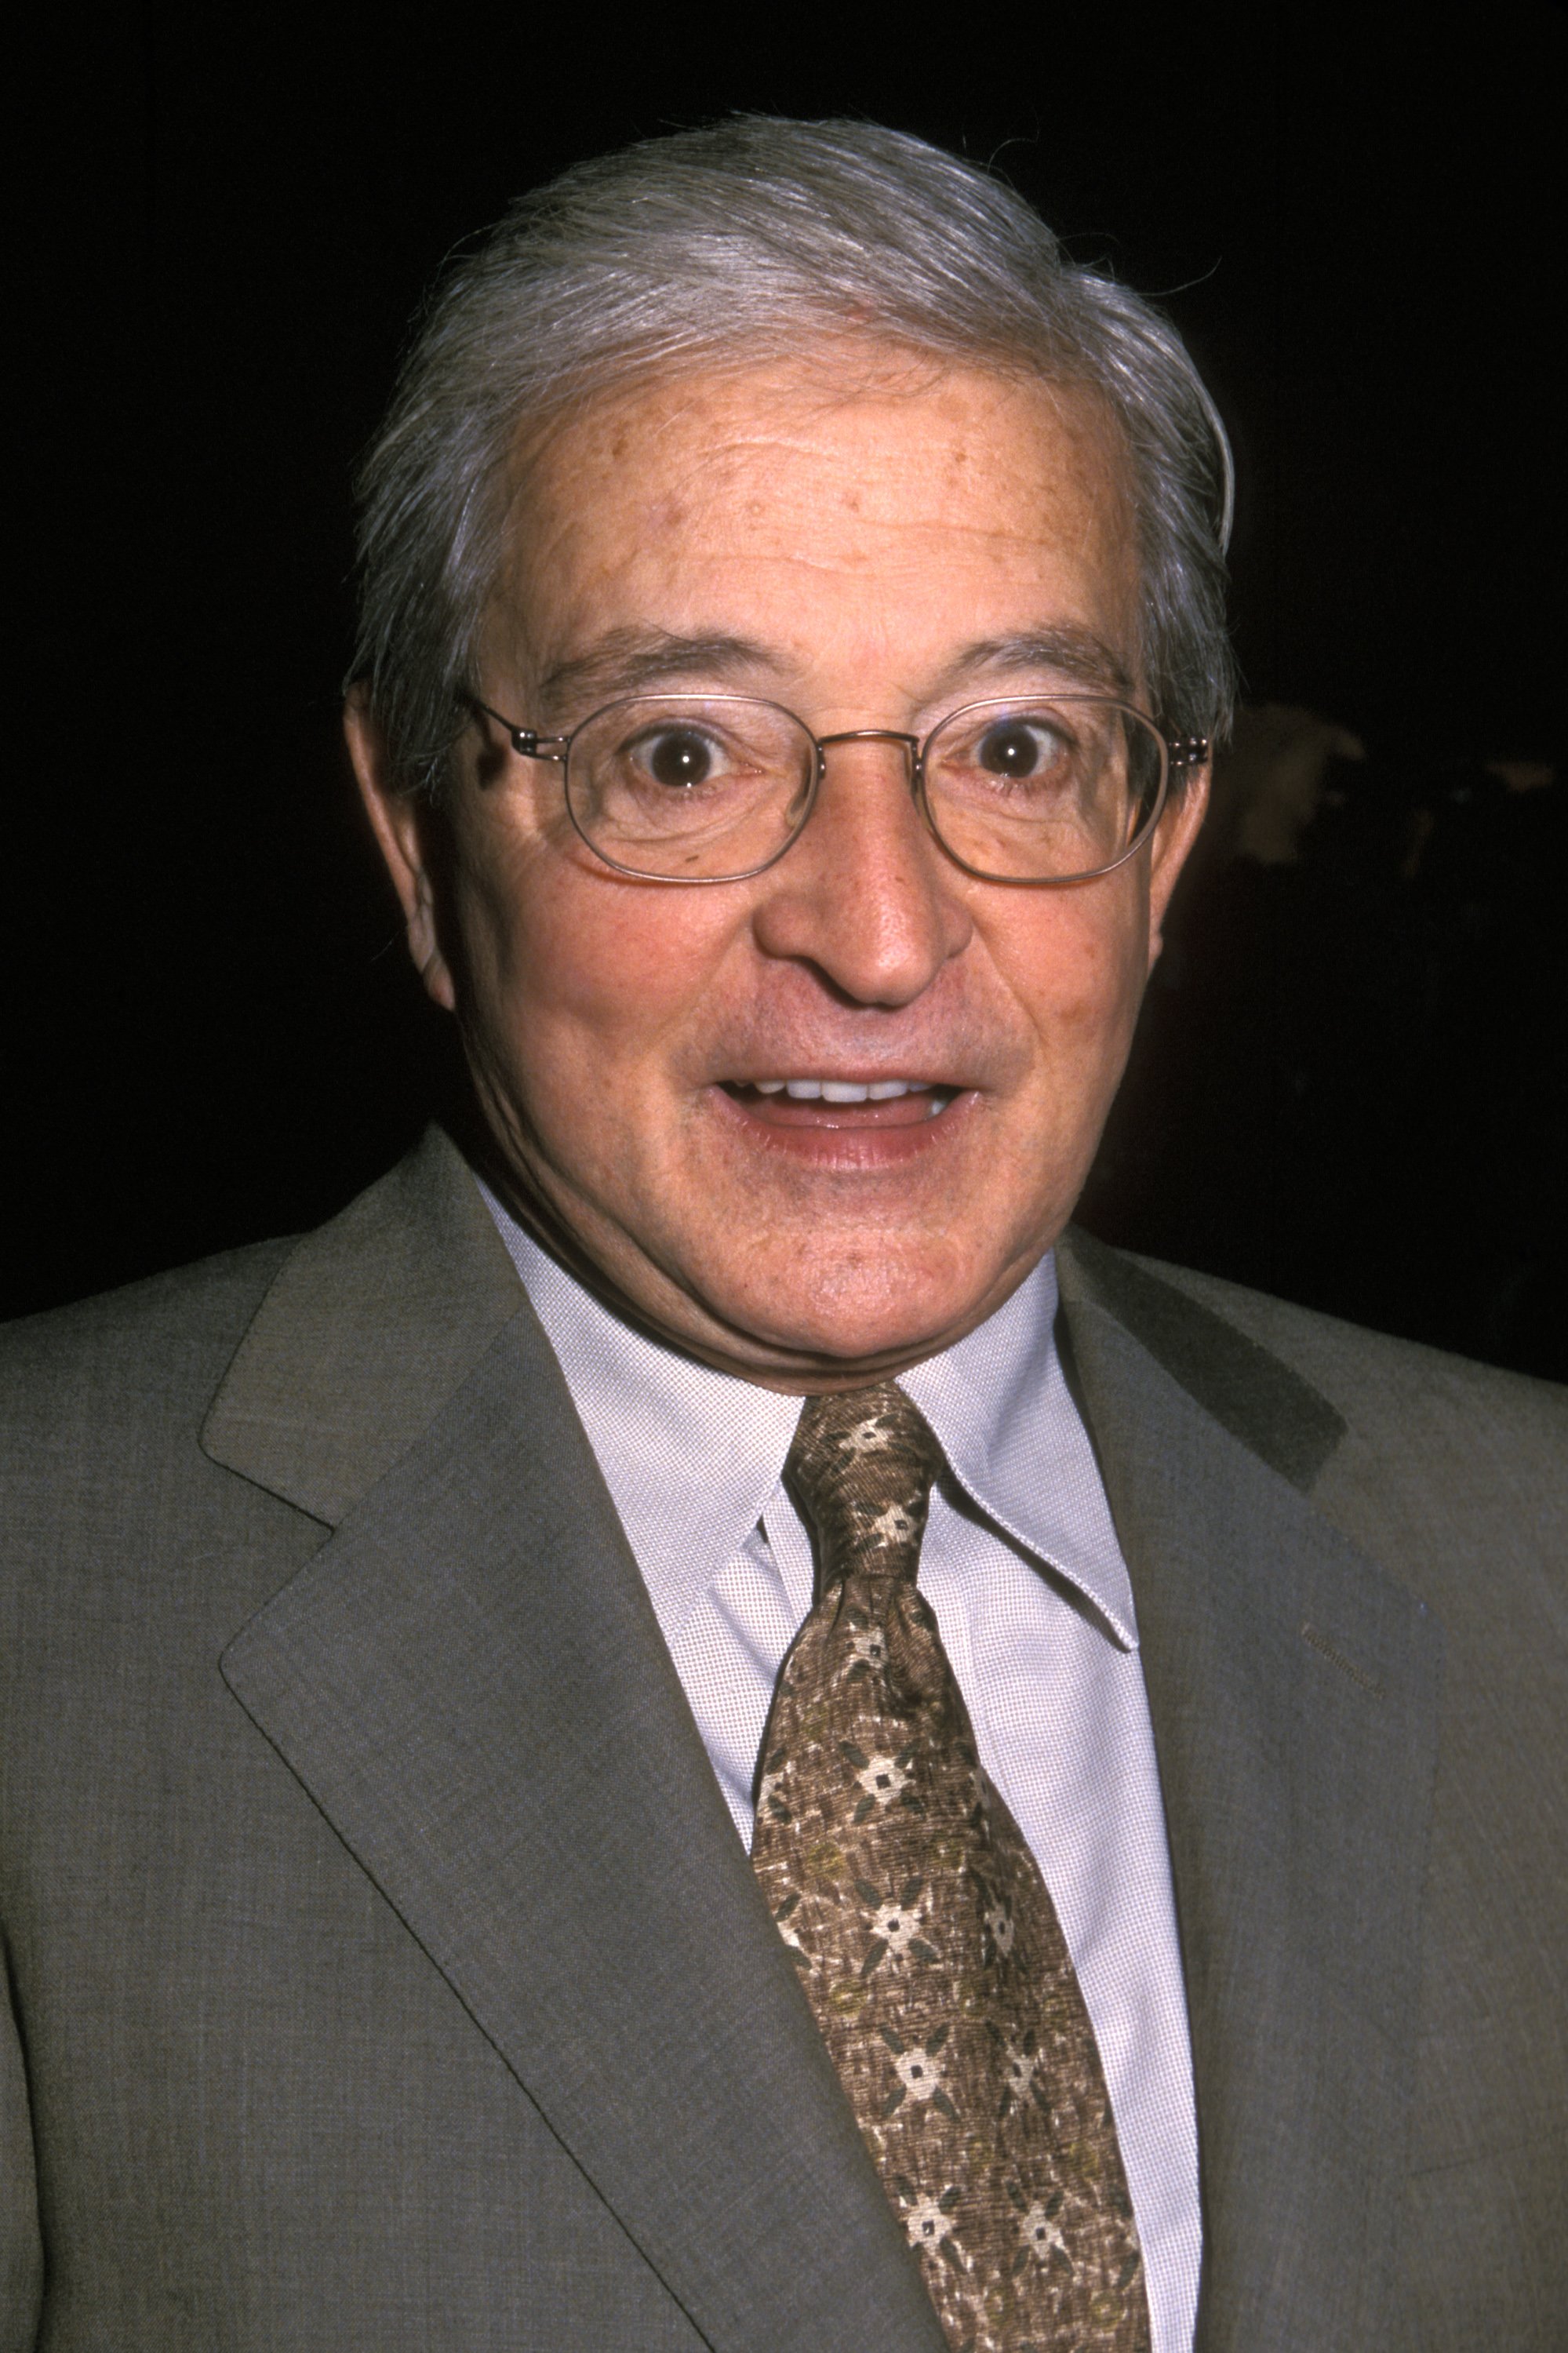 Jerry Sheindlin at the Ladies Home Journal "One Smart Lady Award" on February 23, 2000, in New York City | Source: Getty Images